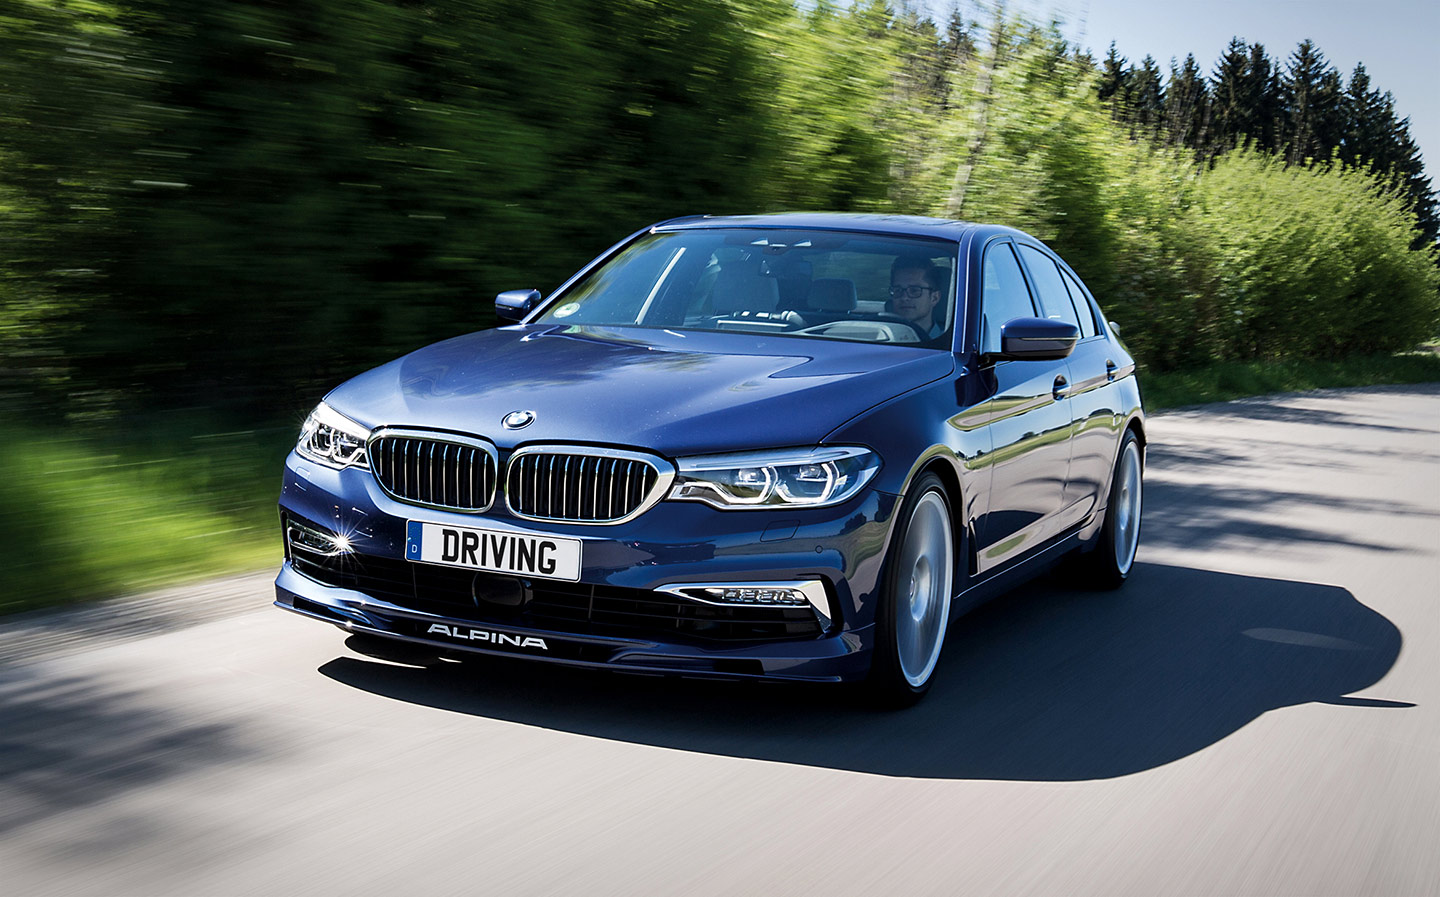 2018 Alpina B5 review by Jeremy Clarkson for Sunday Times Driving